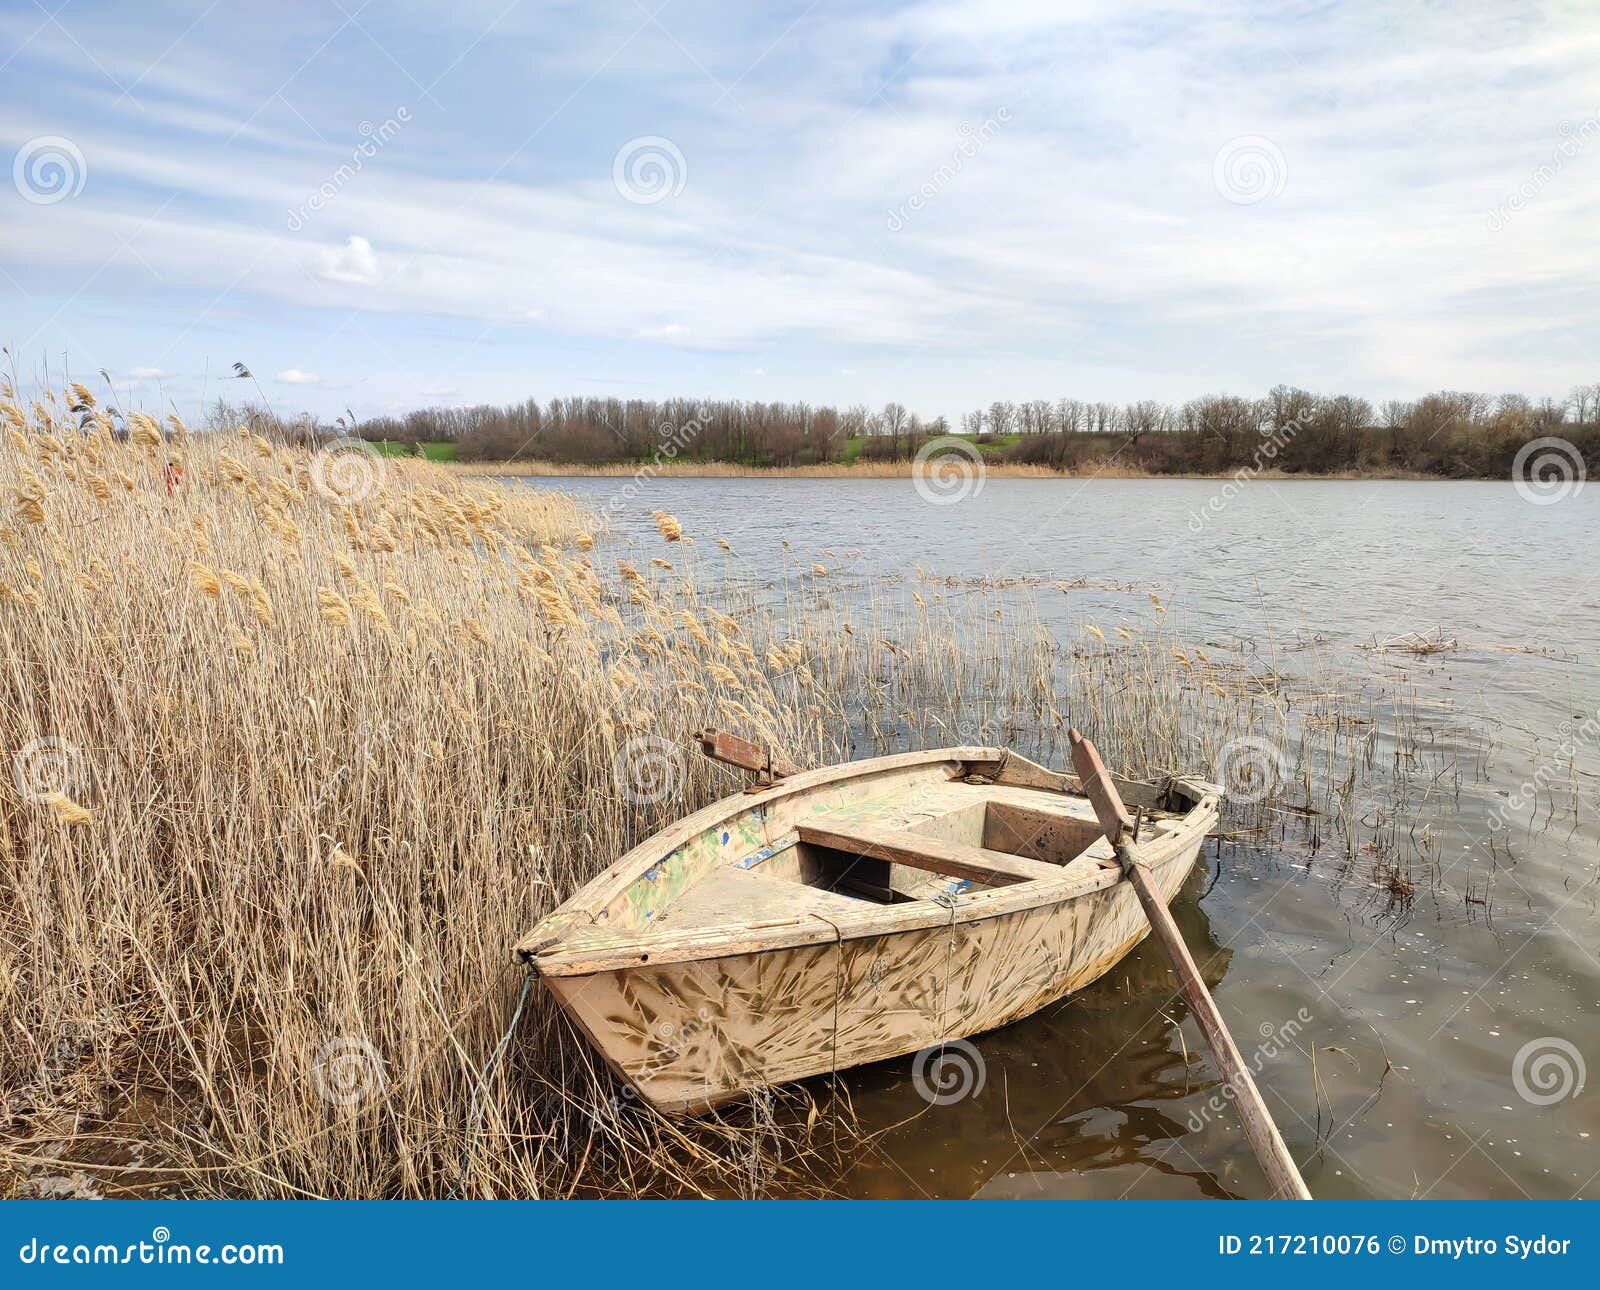 Old Wooden Fishing Boat on River or Pond Stock Photo - Image of margin,  morning: 217210076